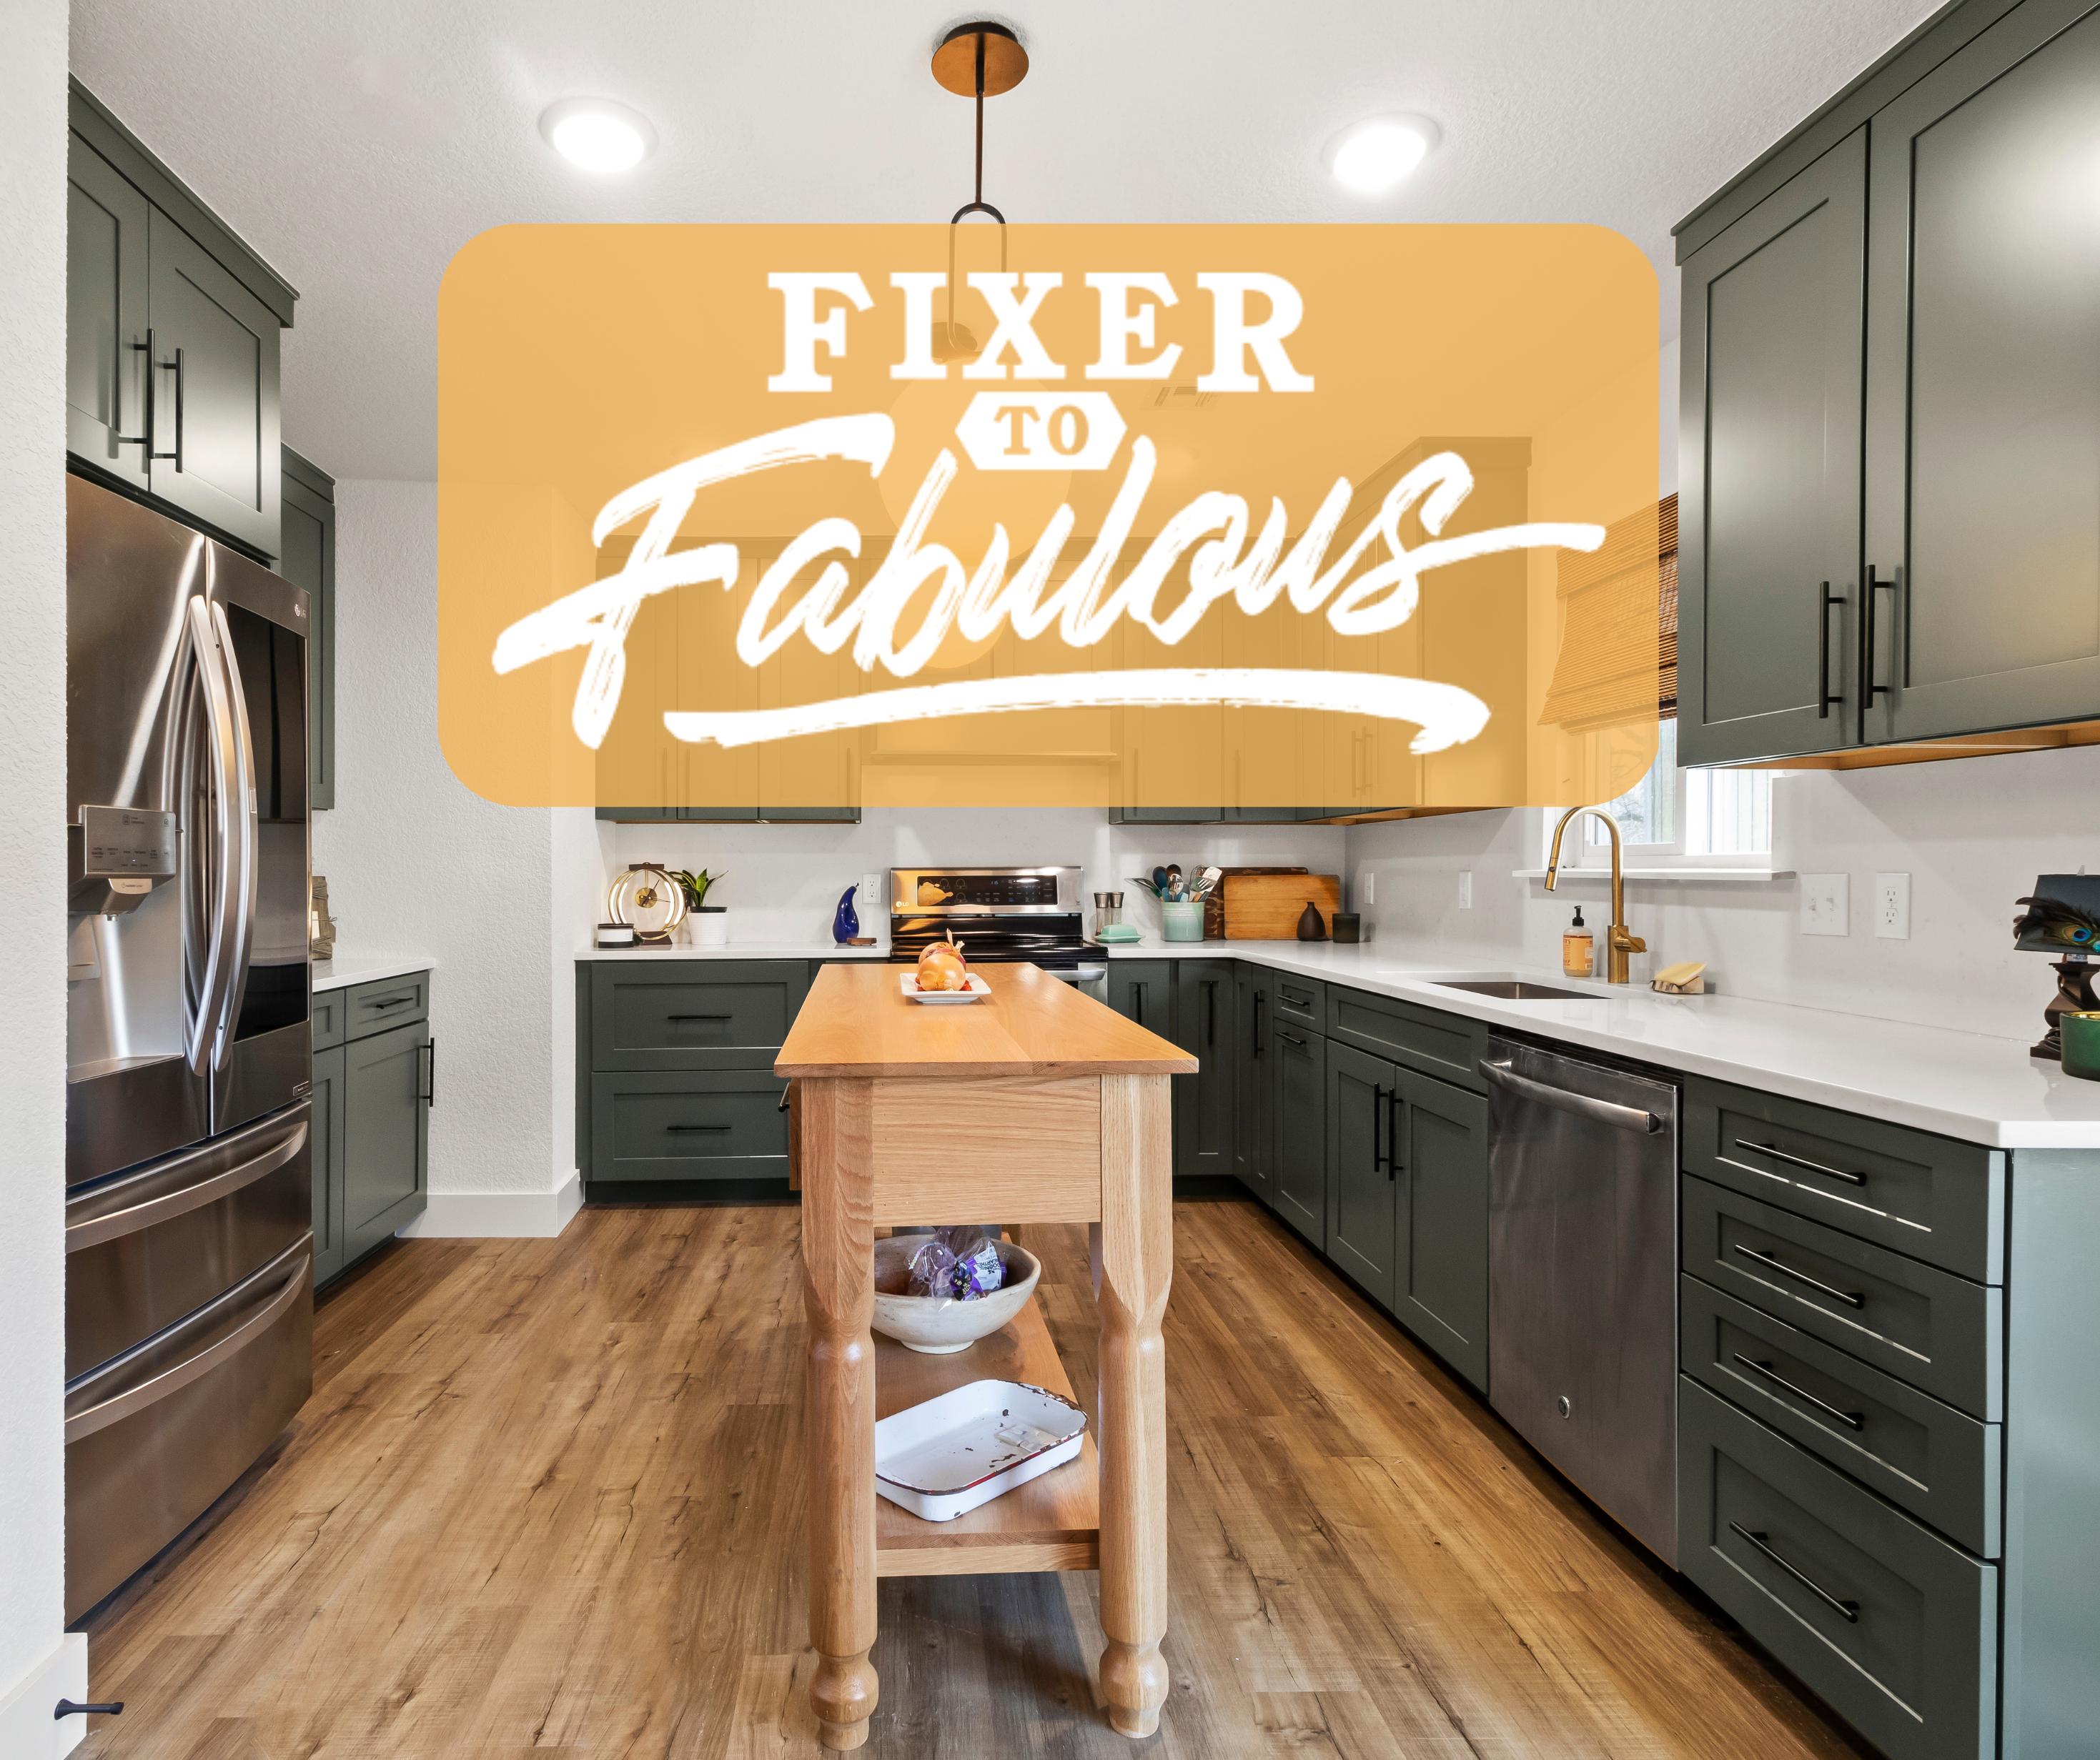 Waypoint Living Spaces Was Featured On Fixer To Fabulous!